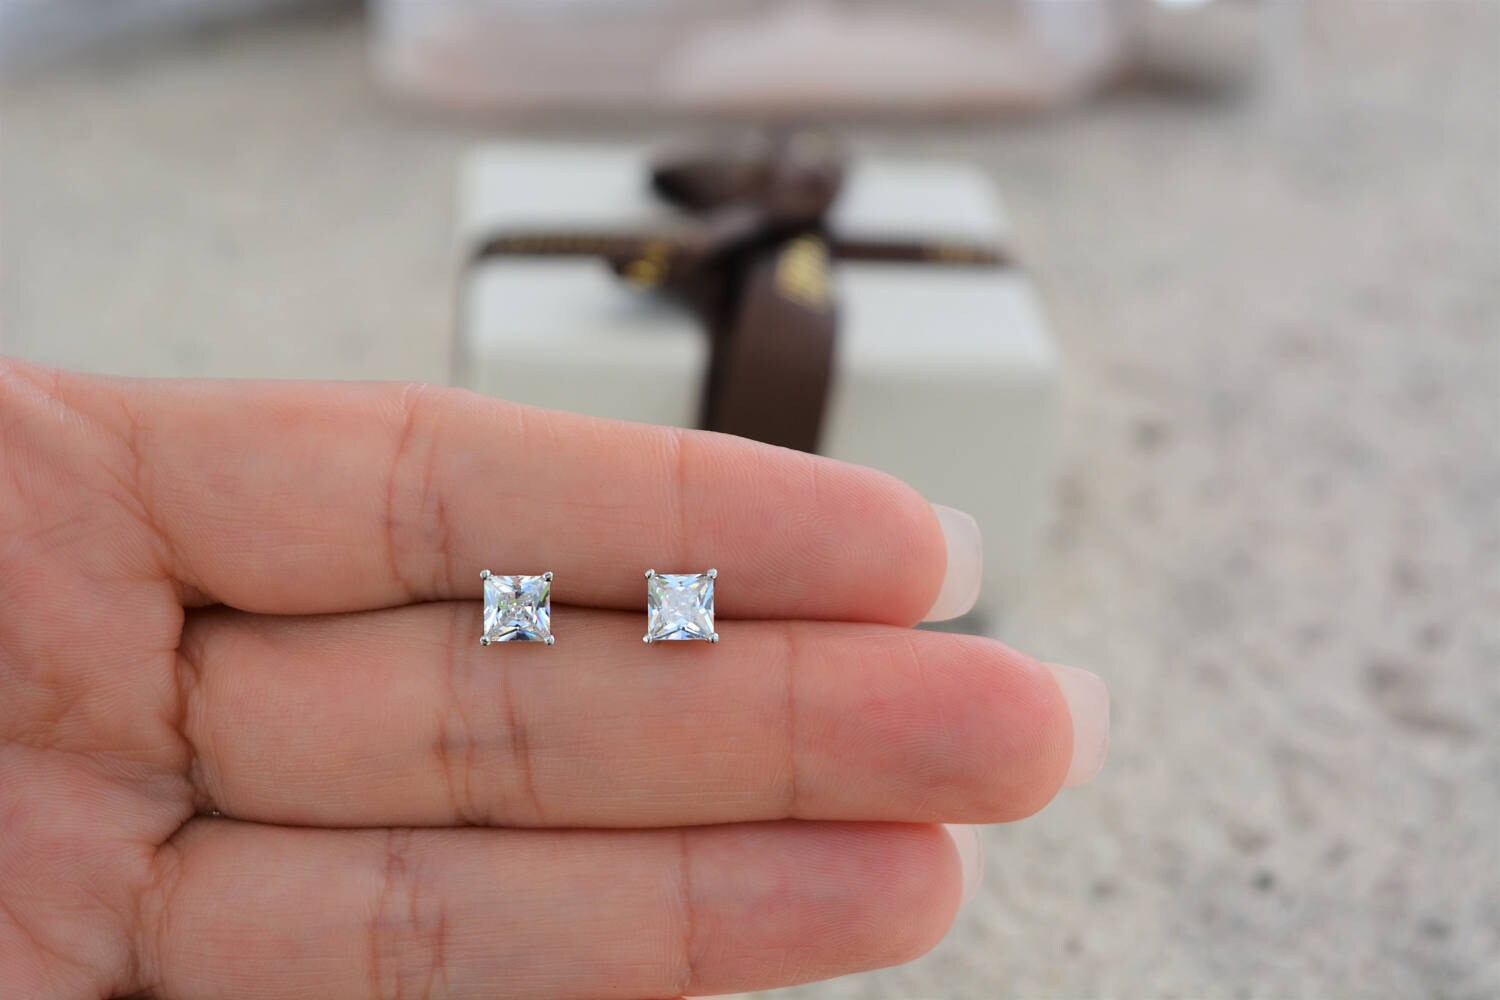 Small Gold Stud Earrings, 4mm Little Gold Zircon Earrings, Women Gold  Plated Stone Solitaire Studs Jewelry, Square Tiny Girls Sparkly Posts -  Etsy Canada | Stud earrings, Crystal stud earrings, Etsy earrings